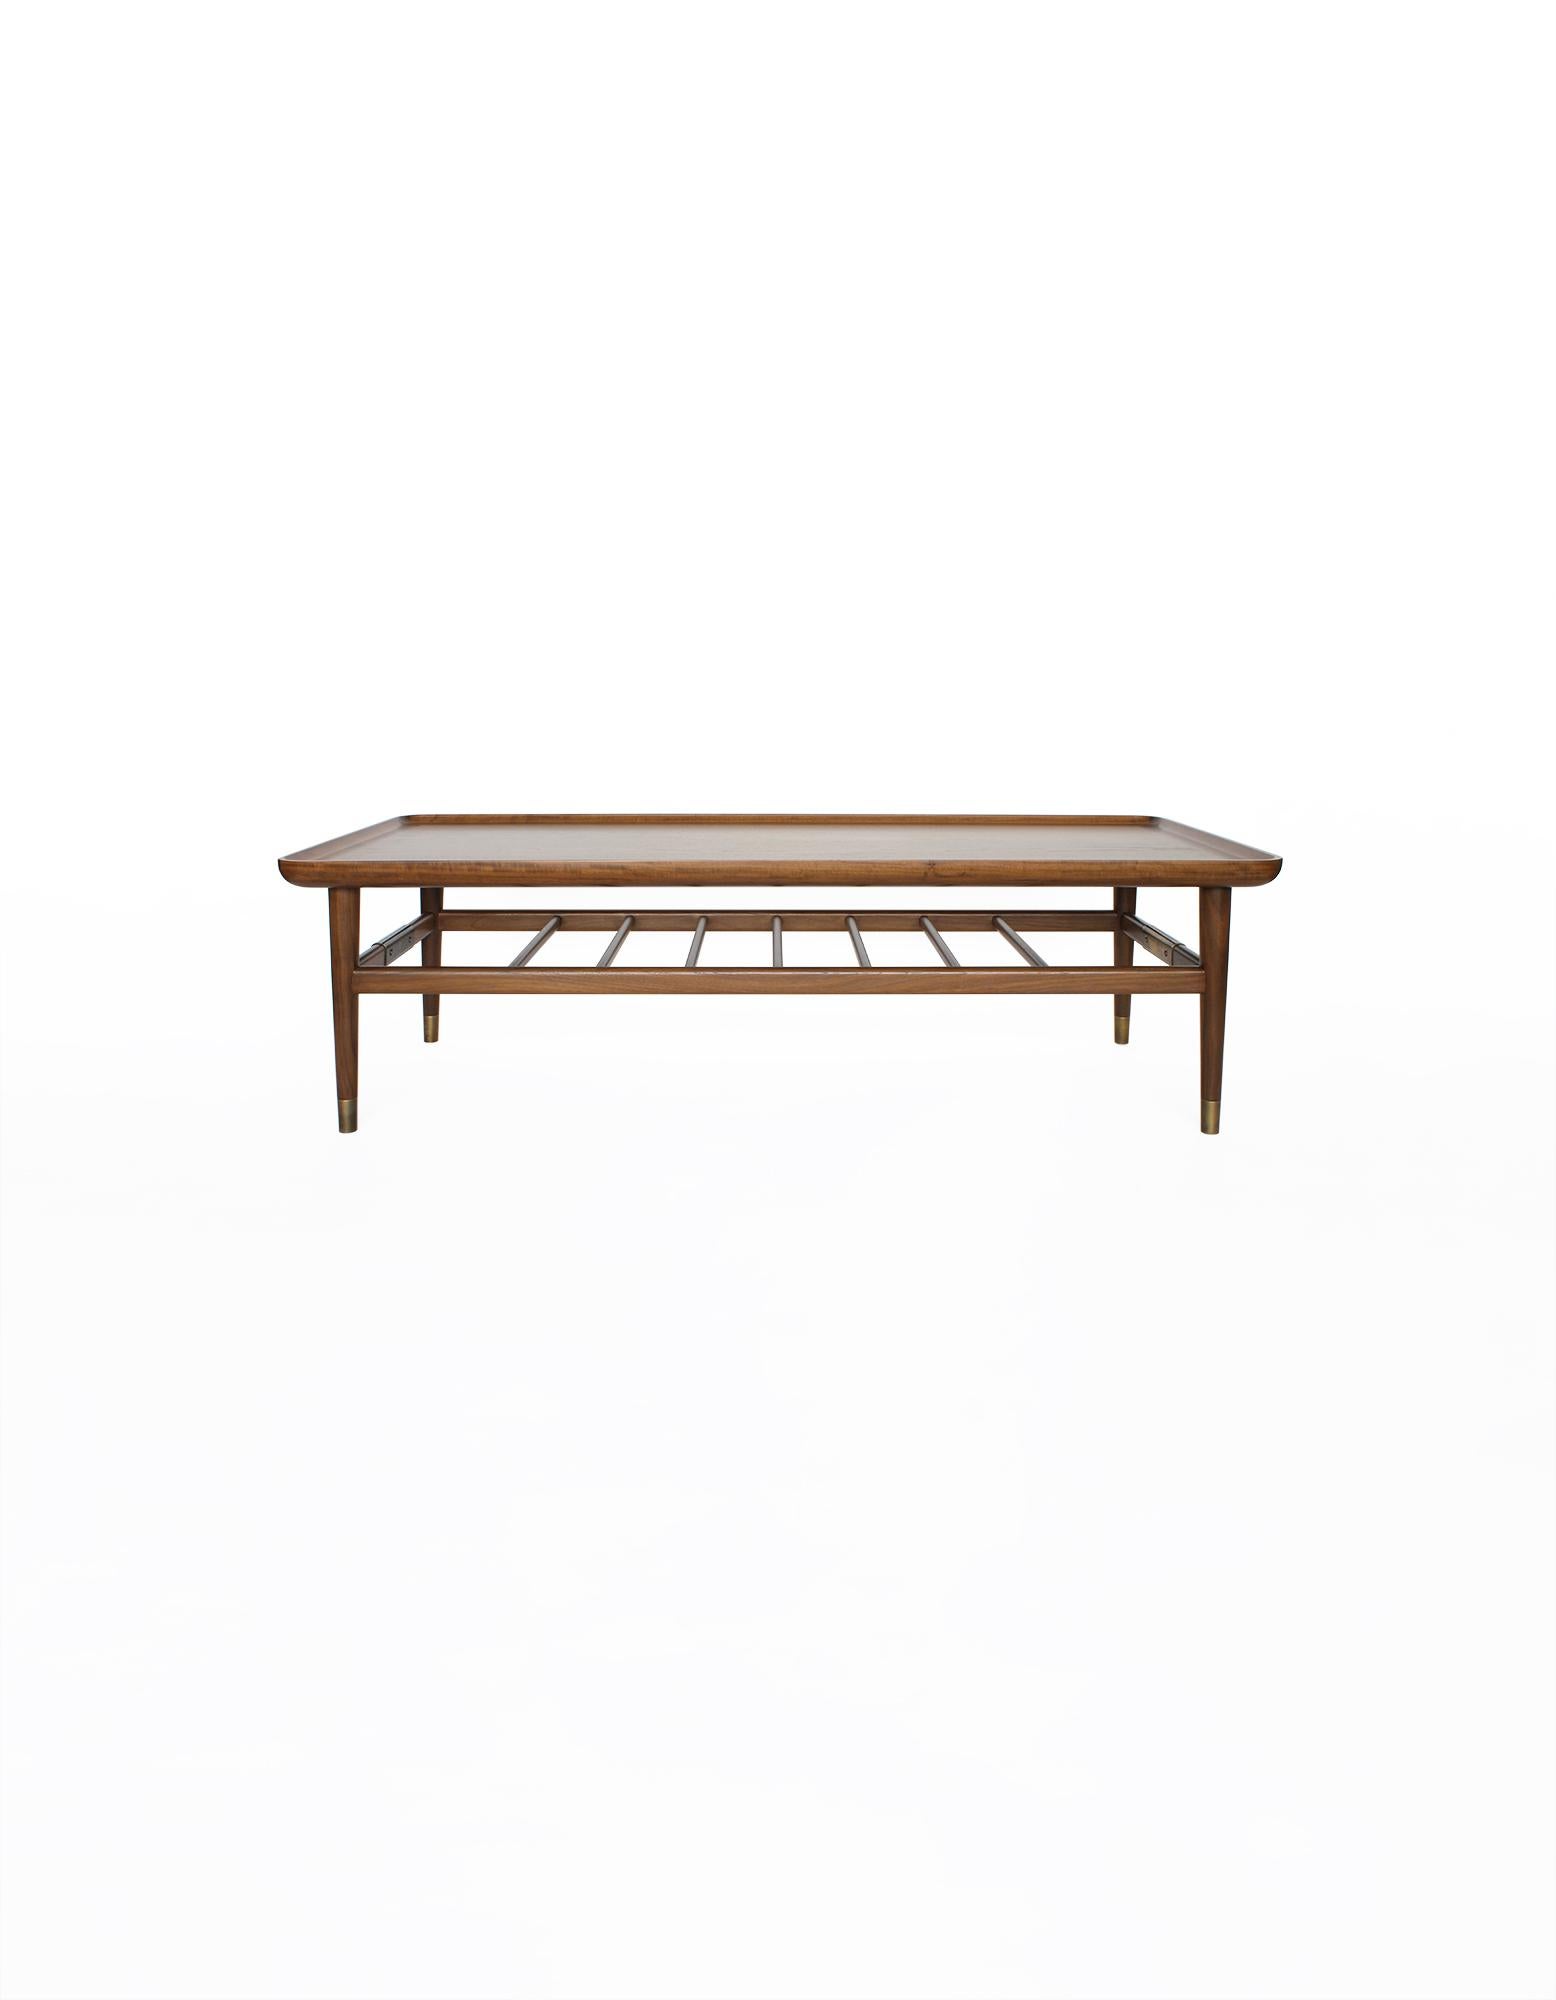 American Oslo Cocktail Table in Light Walnut with Antique Brass Fittings